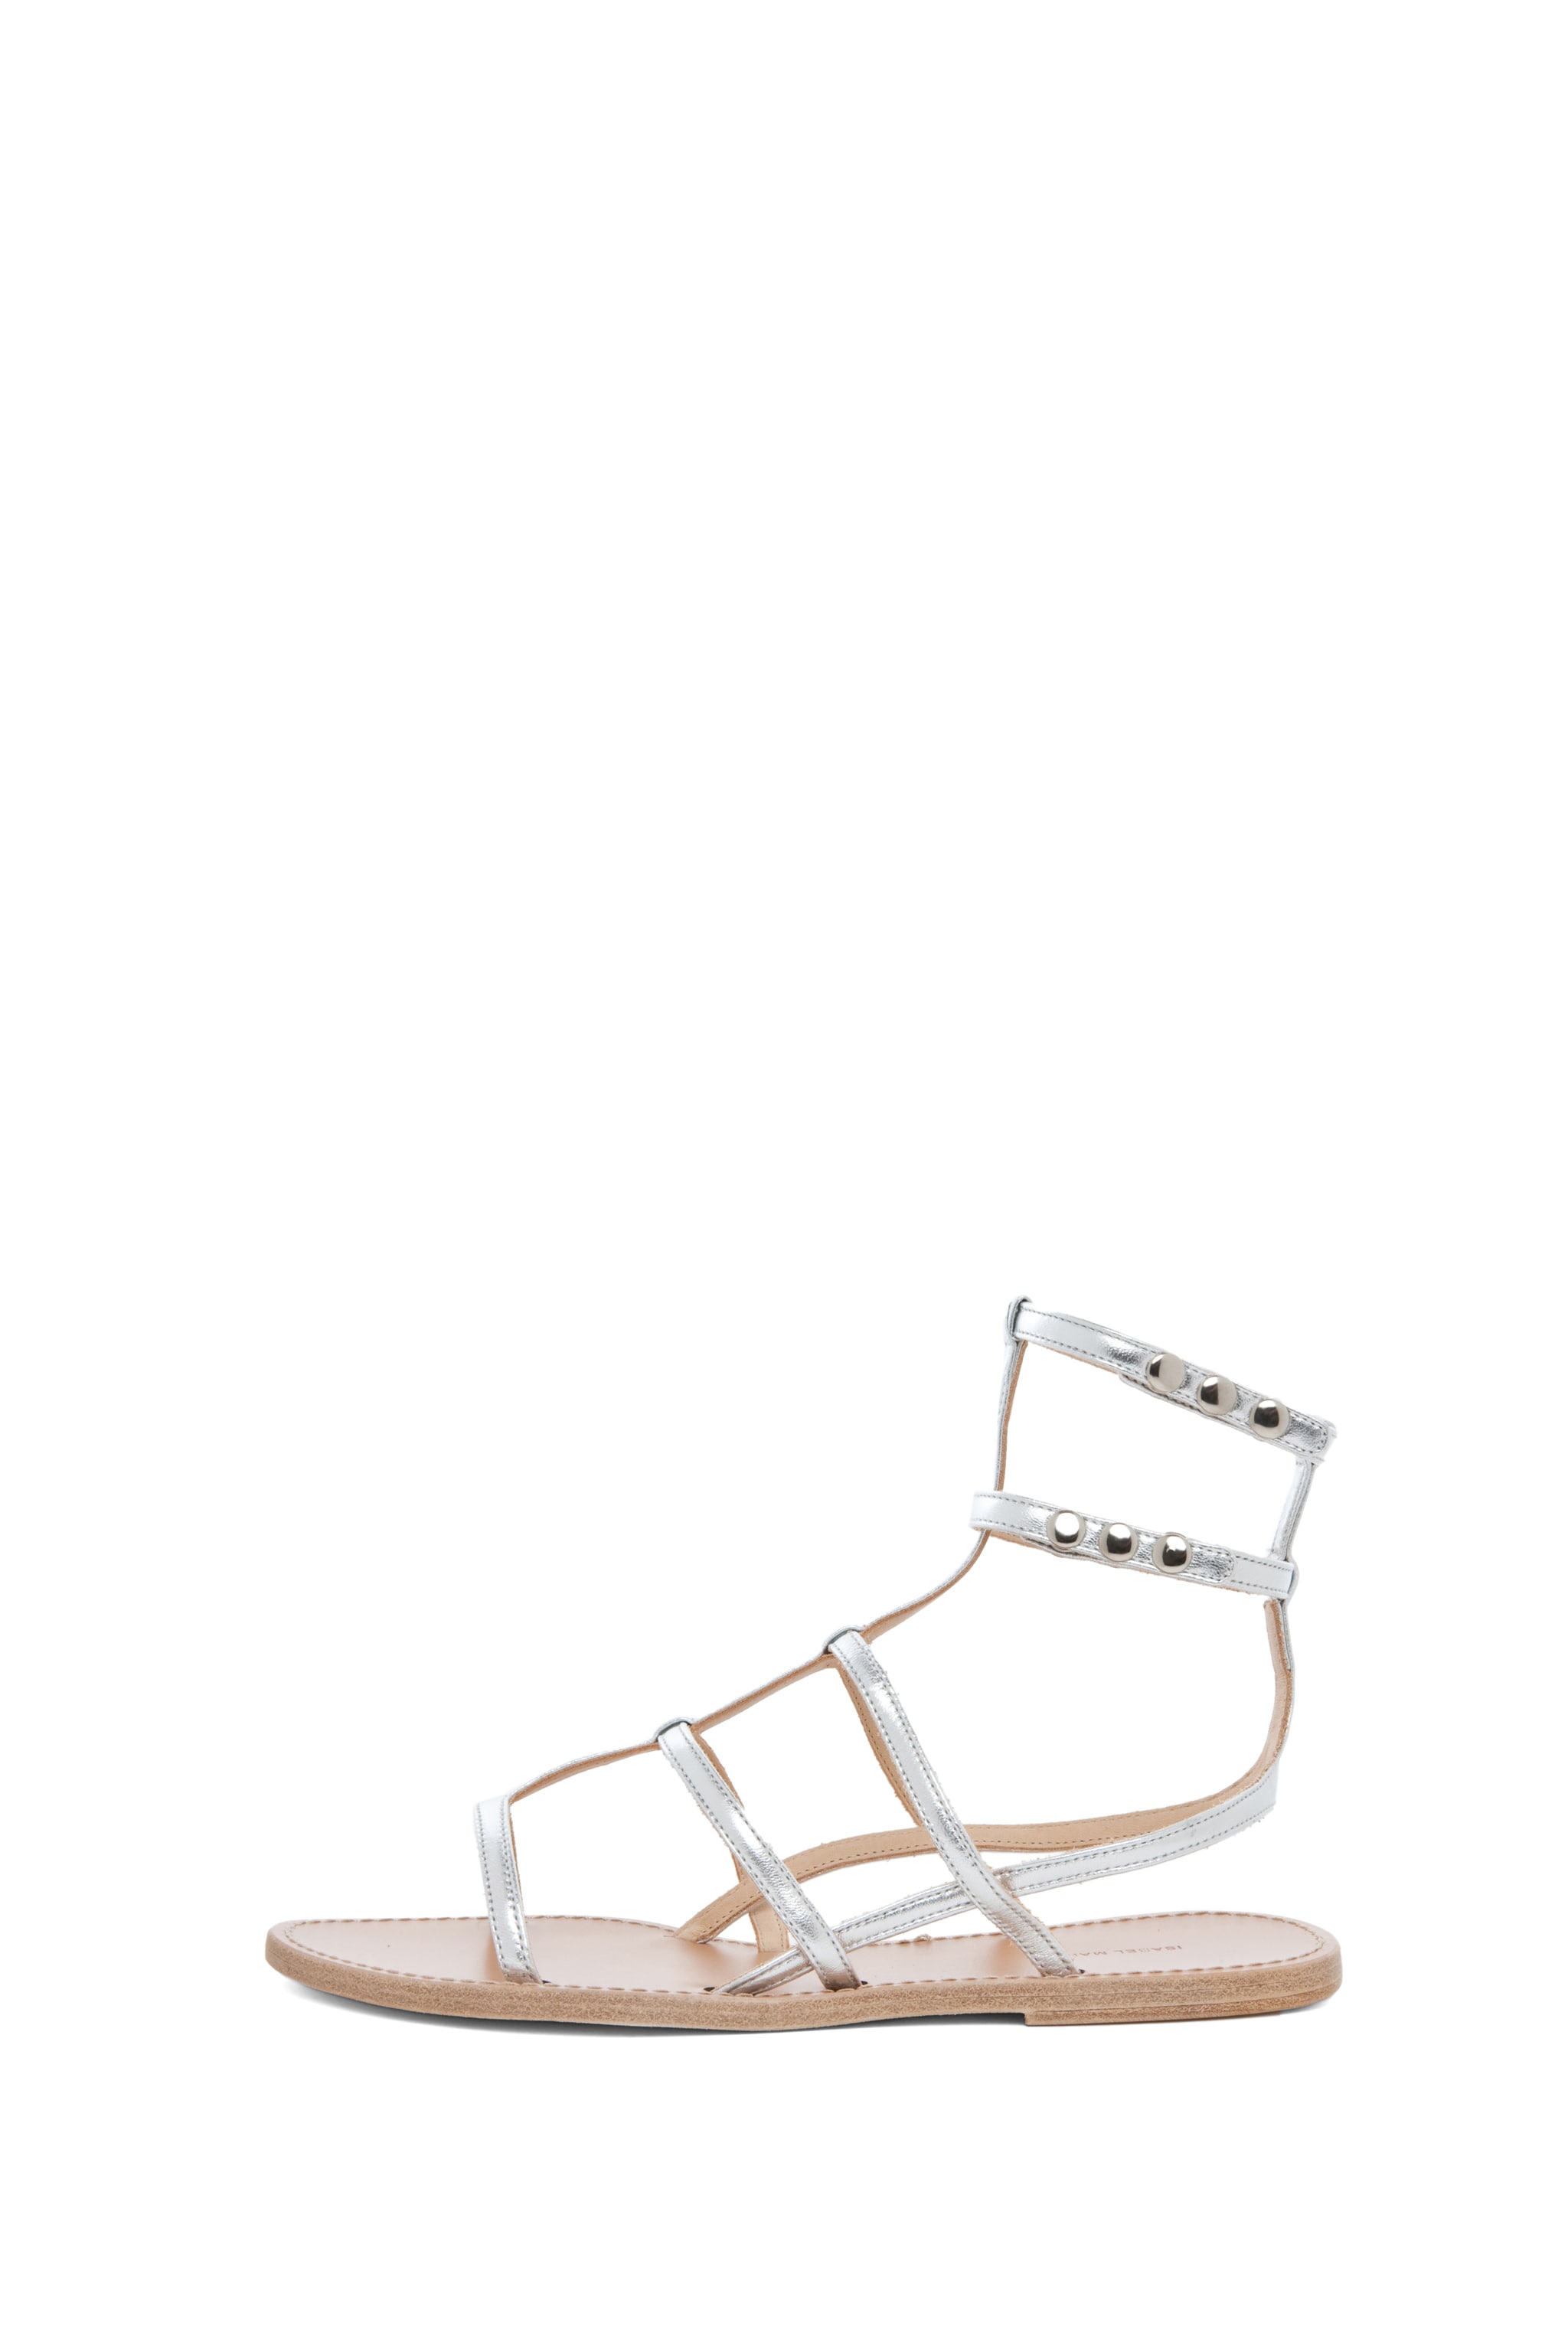 Image 1 of Isabel Marant Orion Sandals in Silver